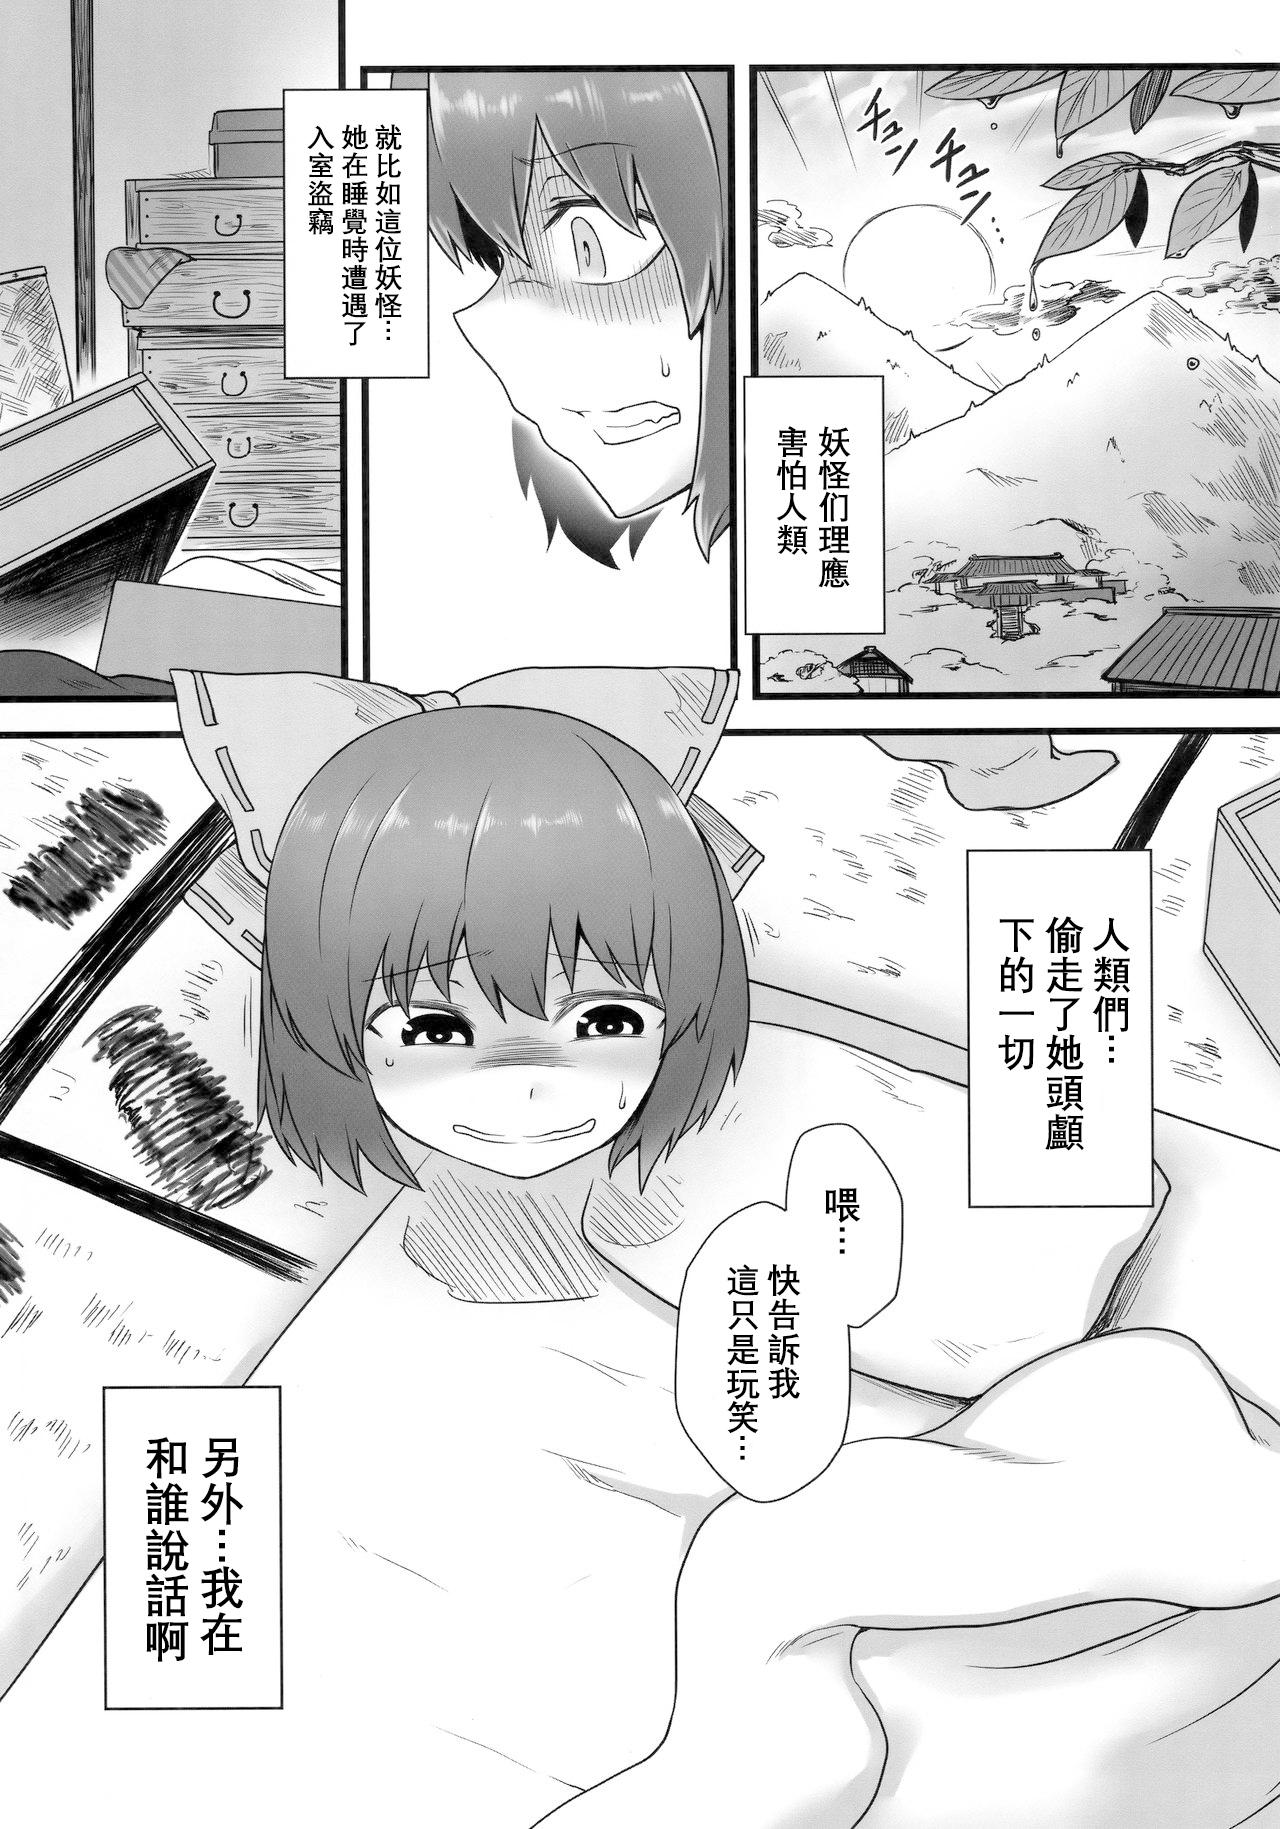 Chichona Onahobanki | 泄器蛮奇 - Touhou project Real Couple - Page 3